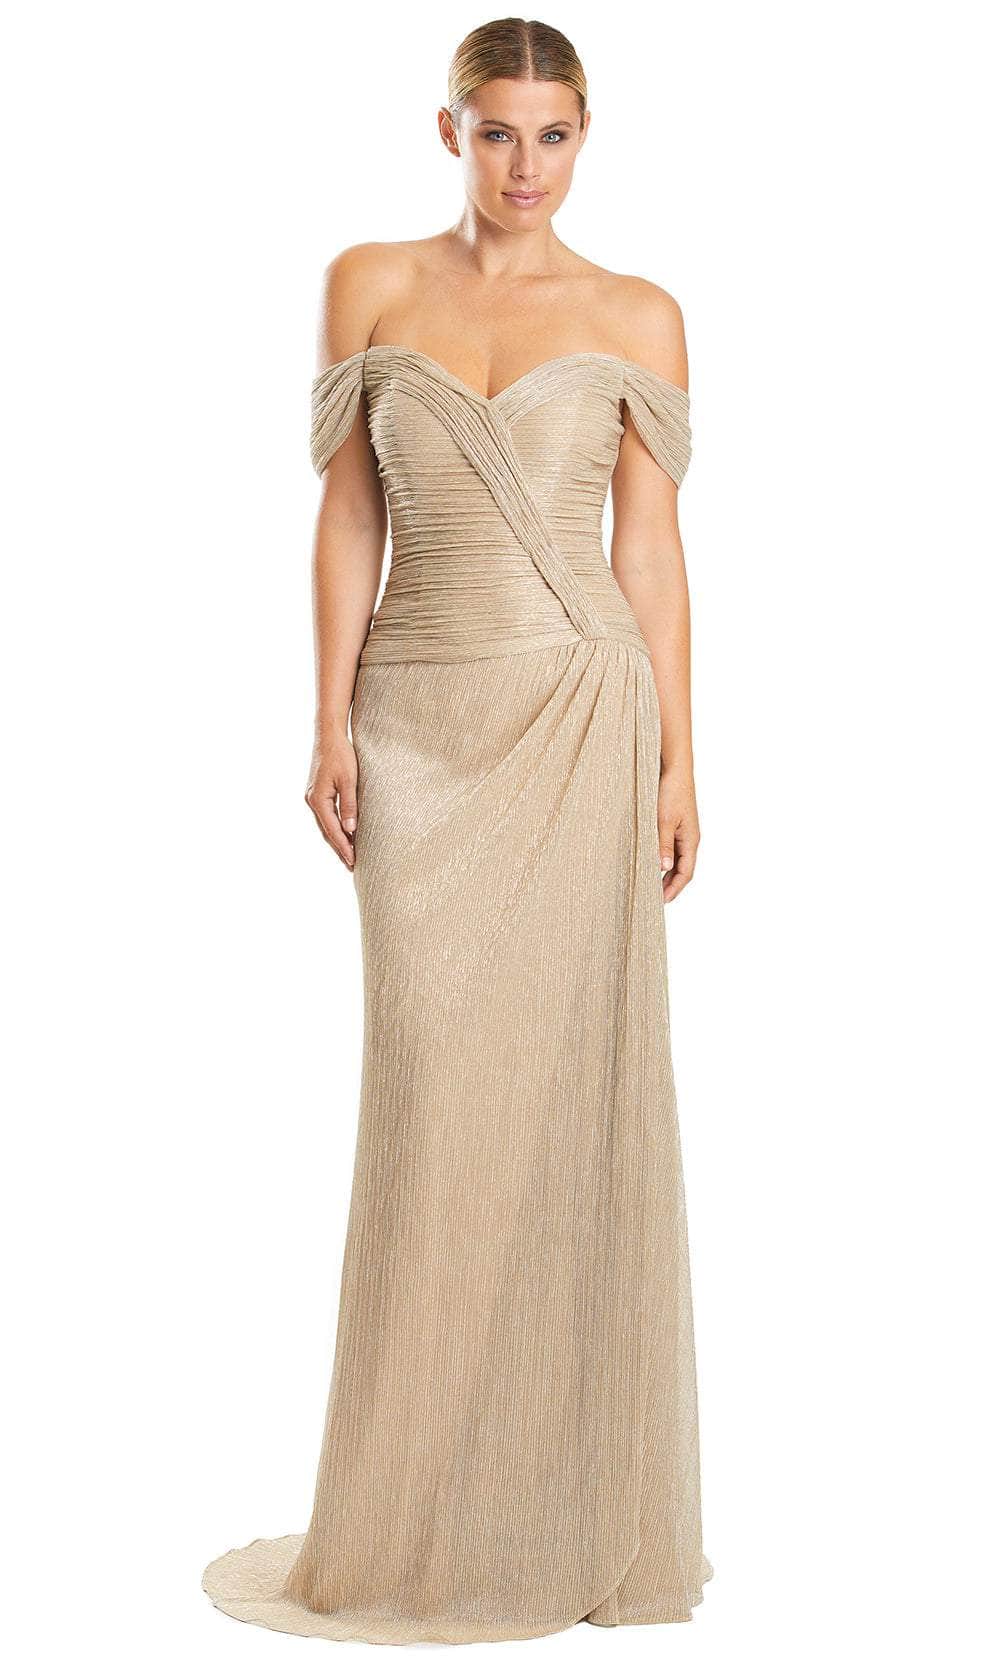 Alexander by Daymor 1858F23 - Off-Shoulder Ruched Prom Dress Special Occasion Dress 00 / Gold